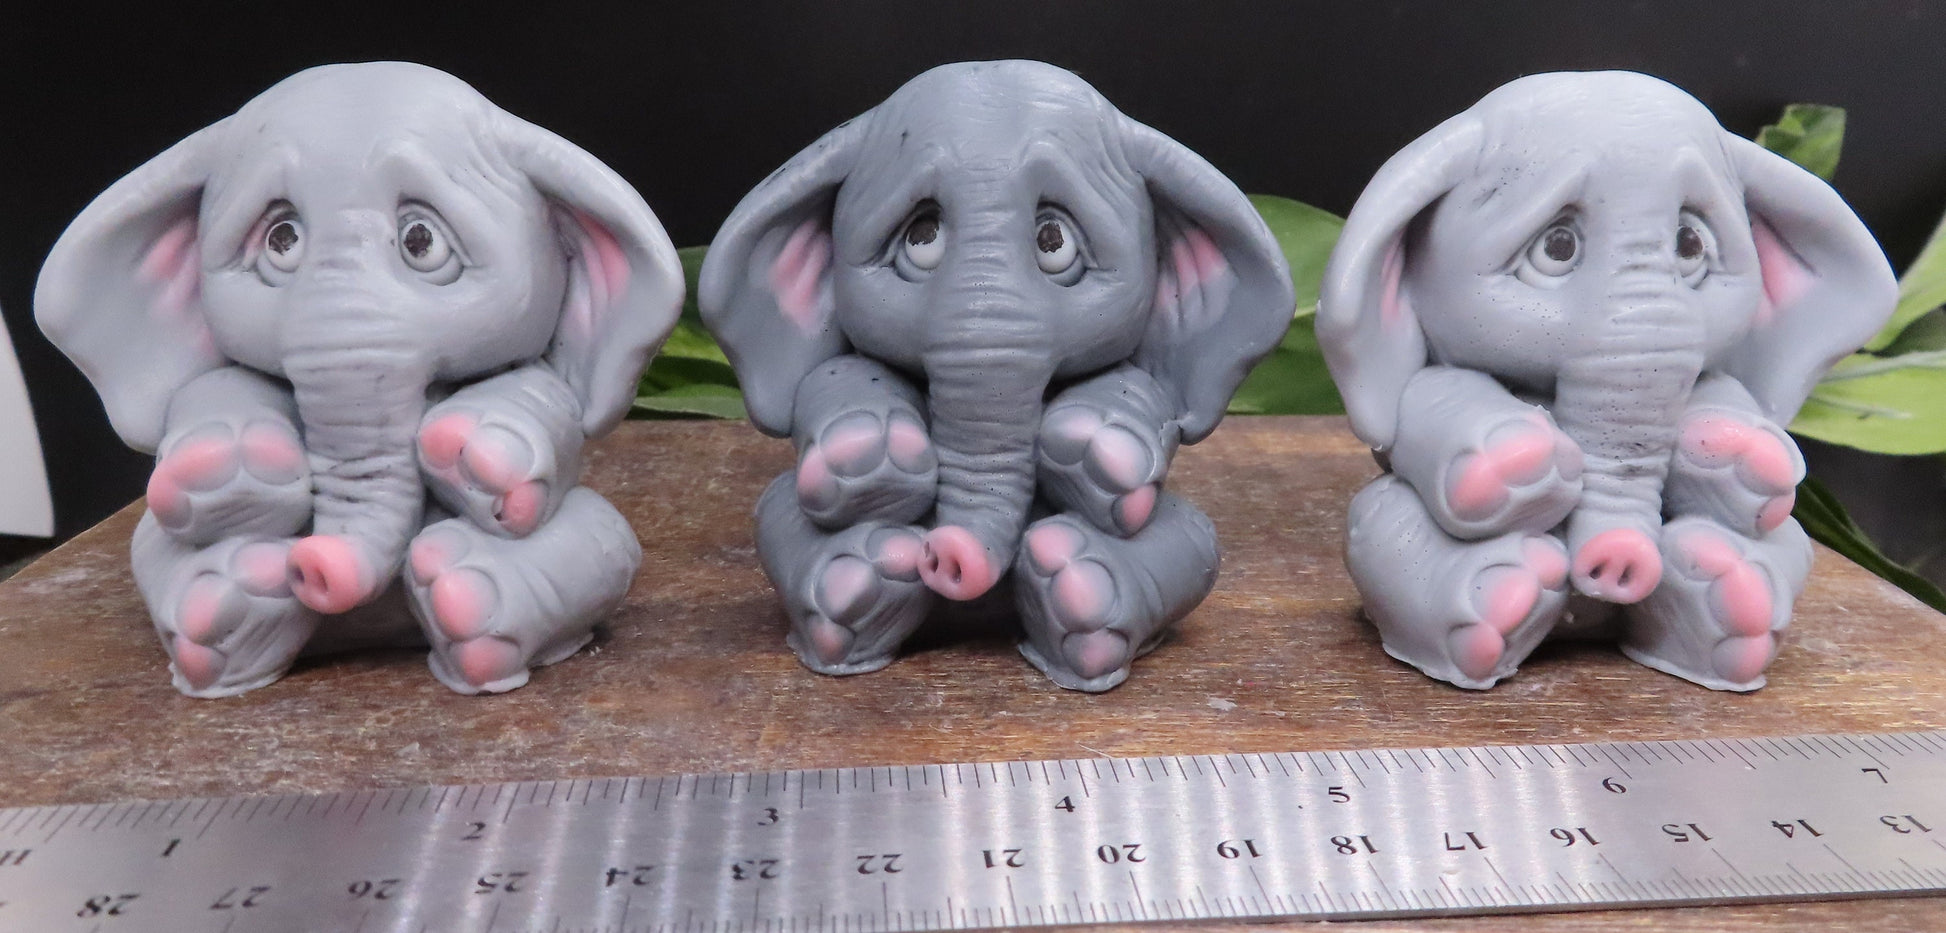 Image of 3 elephant soaps behind a ruler showing width dimention of approximately 2 inches. 